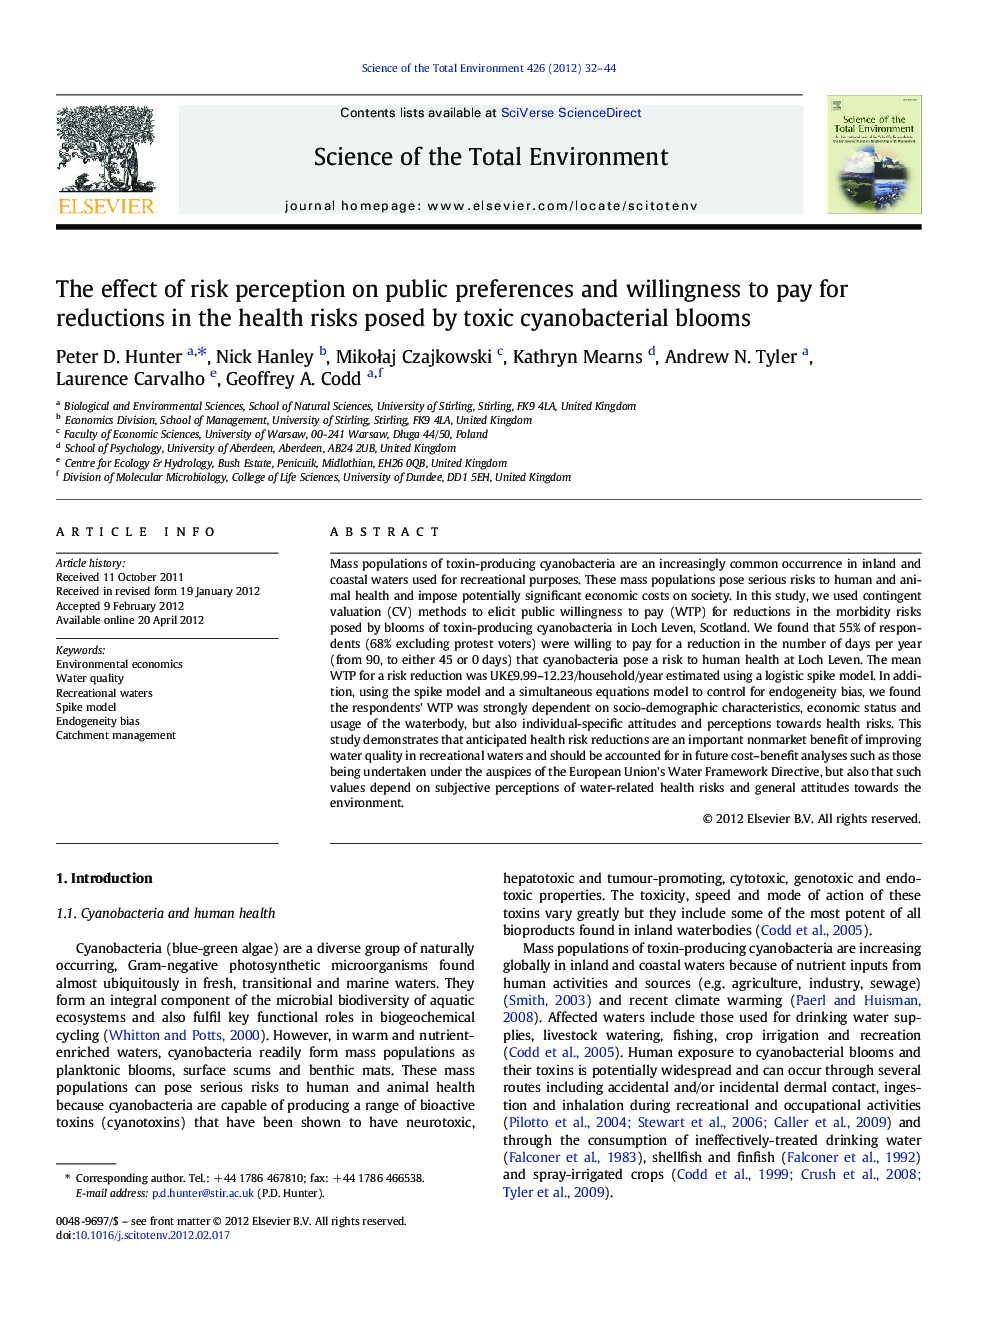 The effect of risk perception on public preferences and willingness to pay for reductions in the health risks posed by toxic cyanobacterial blooms